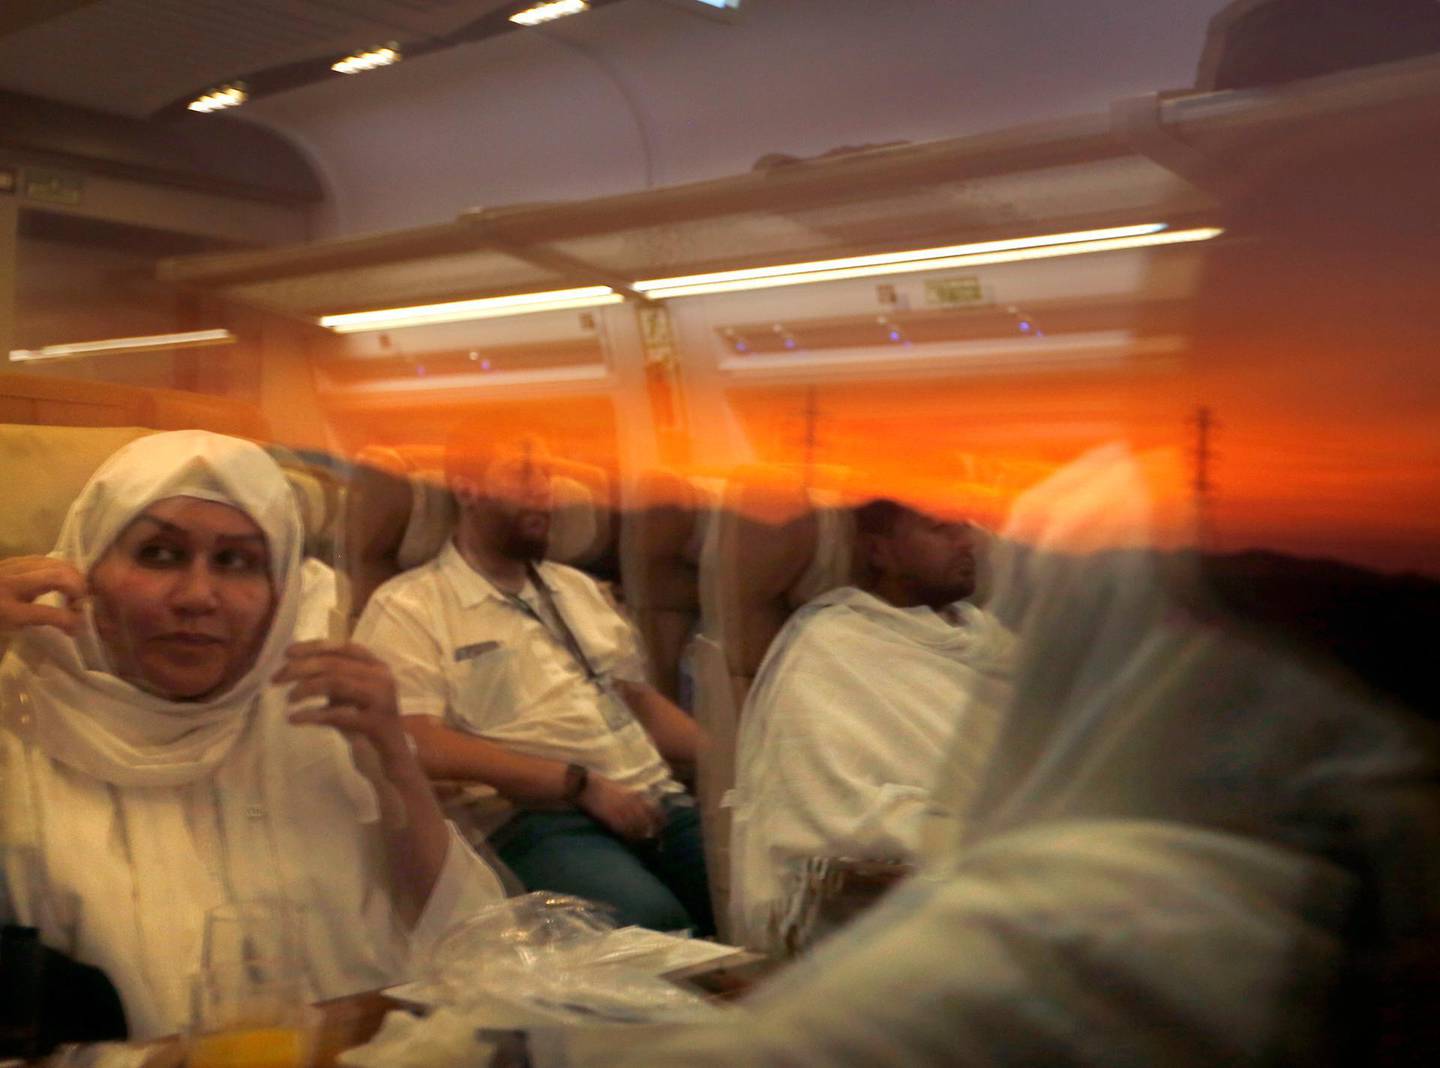 Pilgrims on their way to Mecca are reflected on the window of the Haramain High-Speed Railway train in the holy city of Medina, Saudi Arabia, Thursday, Aug. 8, 2019. Hundreds of thousands of Muslims have arrived in the kingdom to participate in the annual hajj pilgrimage, which starts Friday, a ritual required of all able-bodied Muslims at least once in their life. (AP Photo/Amr Nabil)